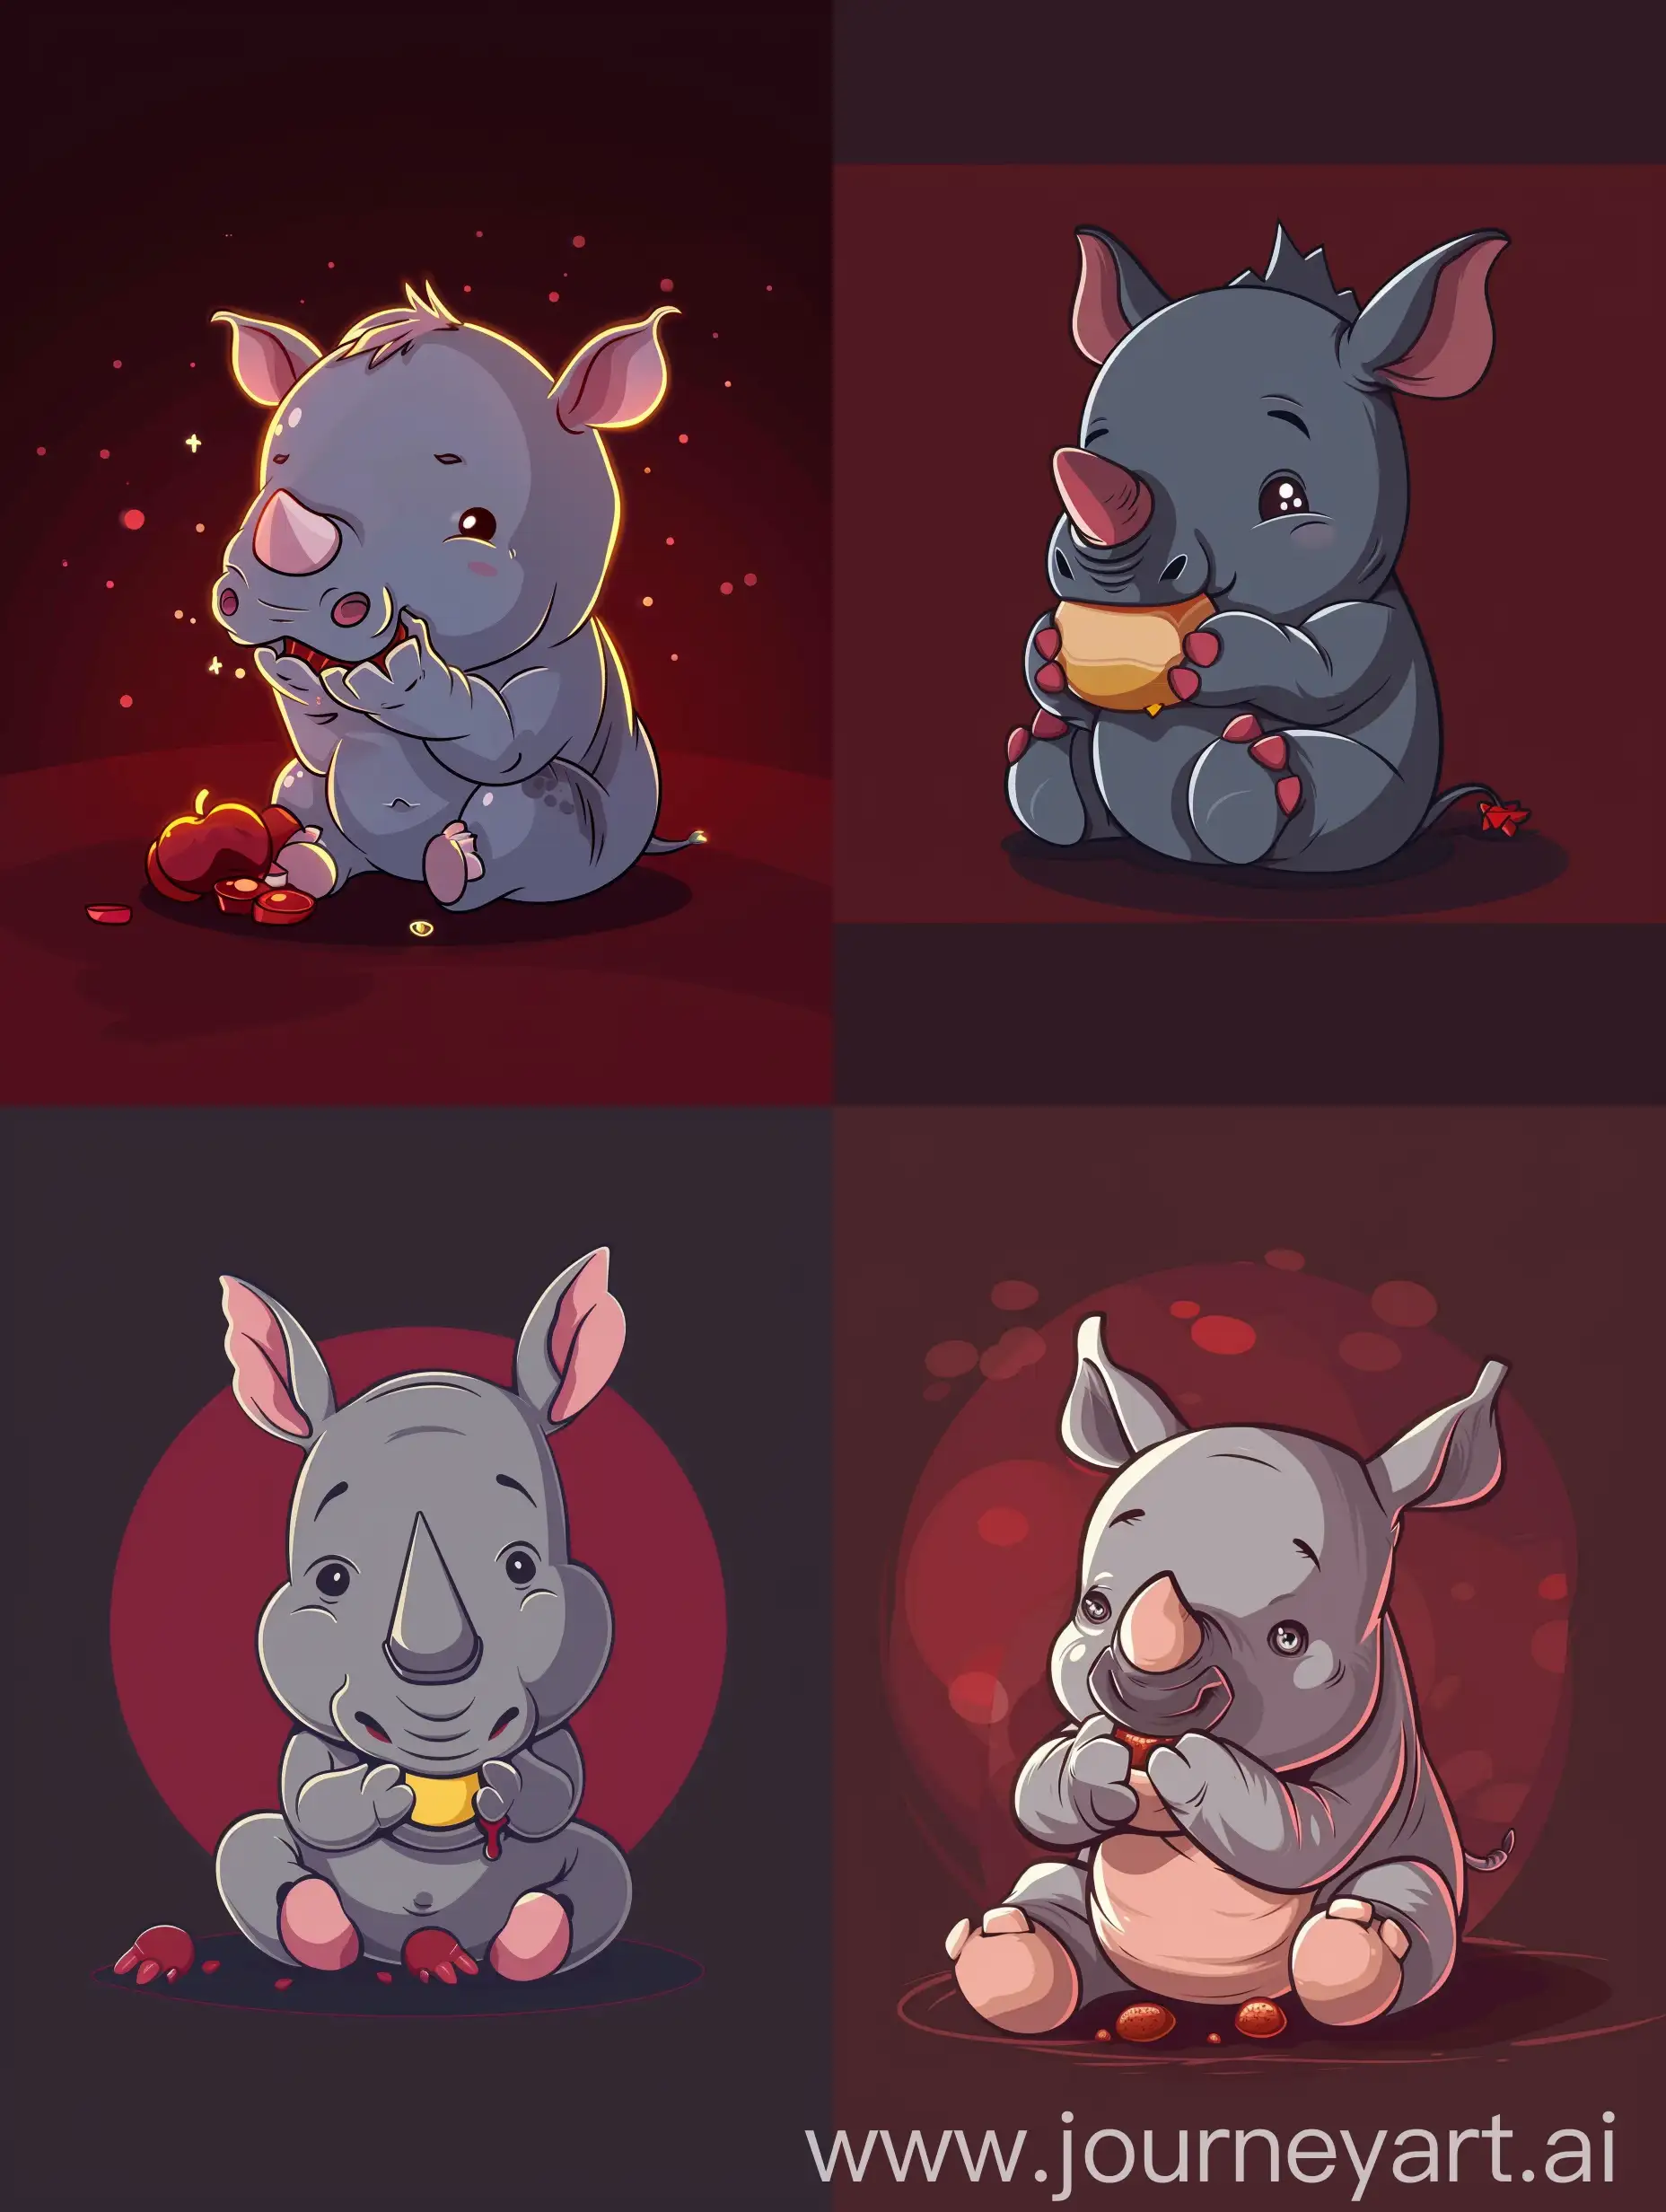 Adorable-Chibi-Rhino-Enjoying-a-Meal-Against-a-Rich-Red-Backdrop